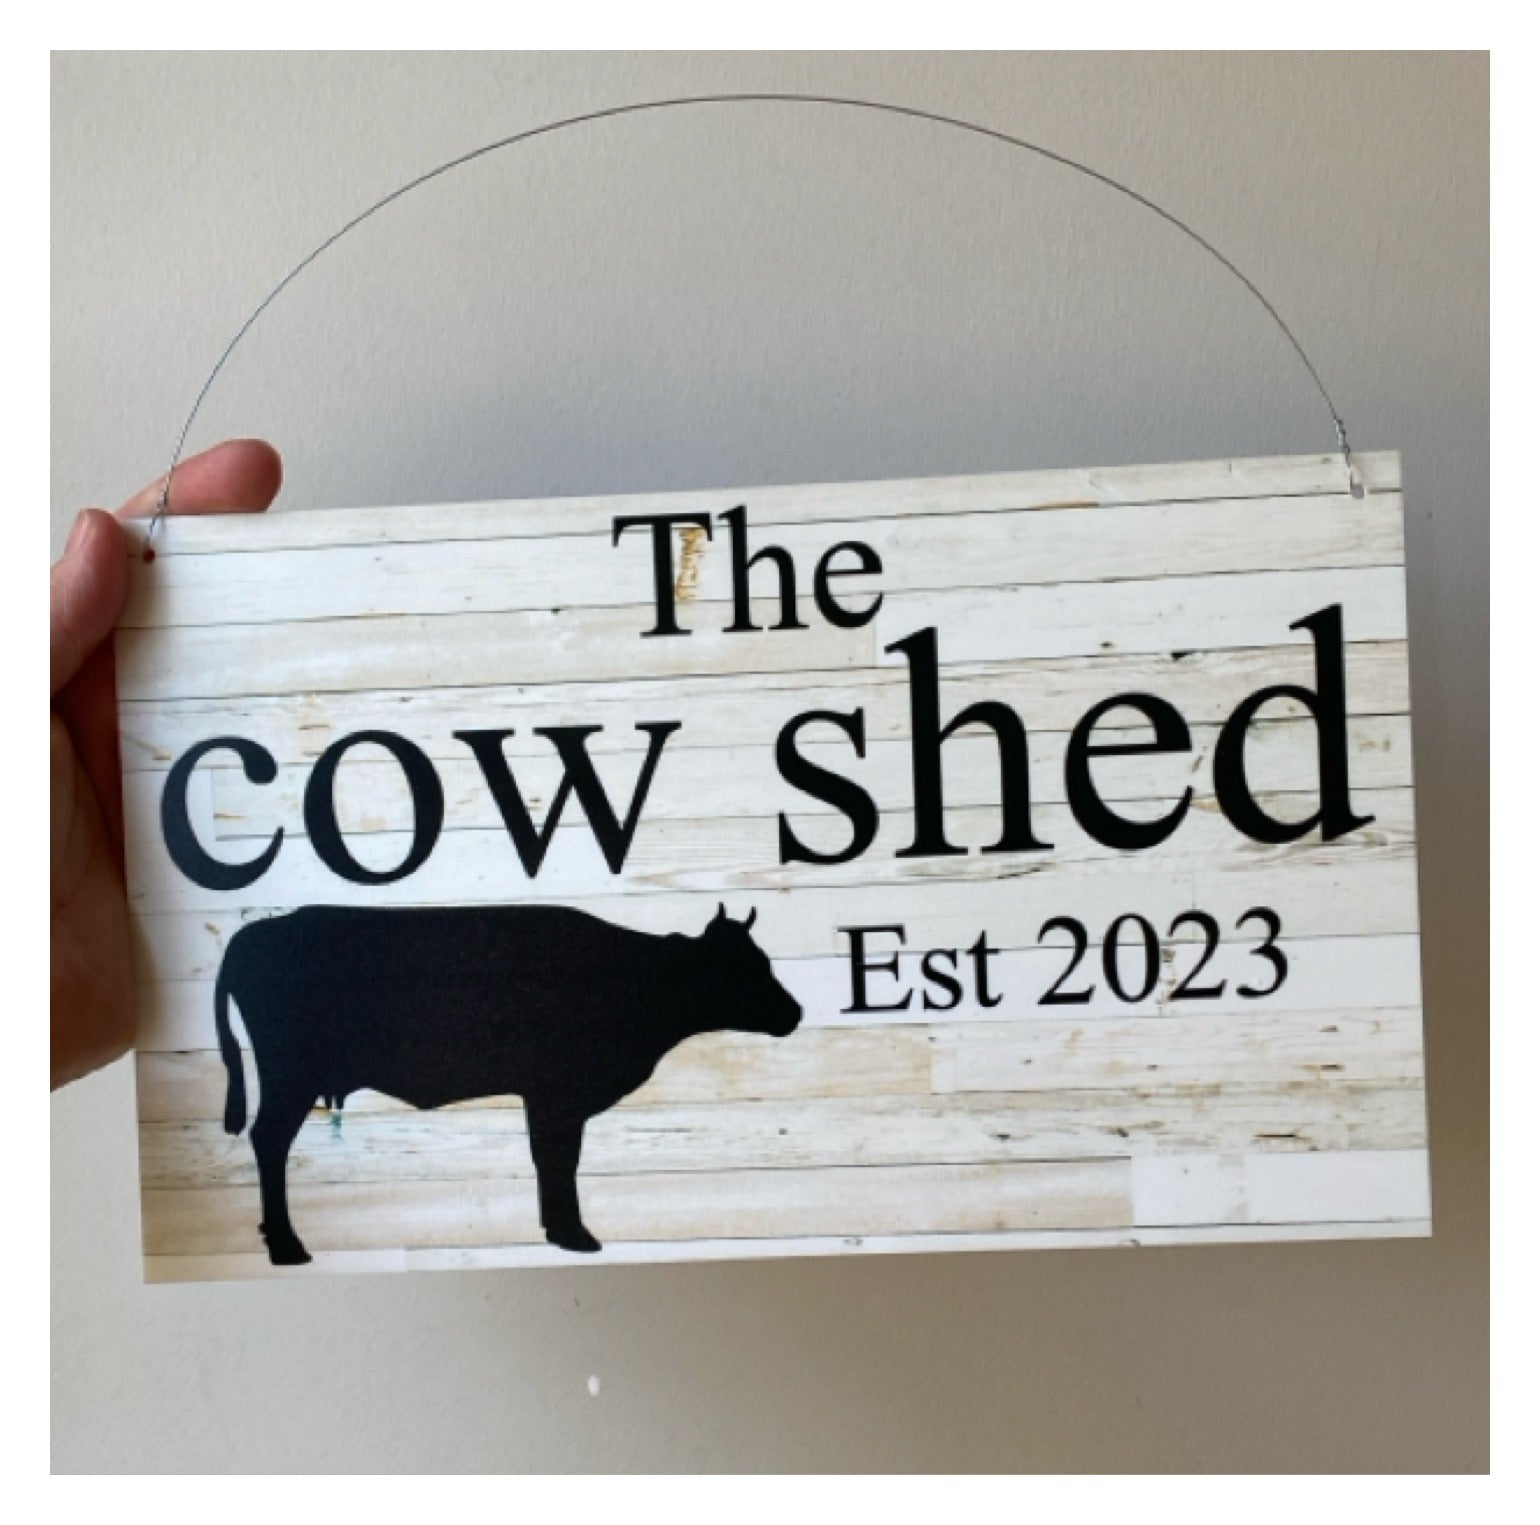 Cow Rustic Country Custom Personalised Sign - The Renmy Store Homewares & Gifts 